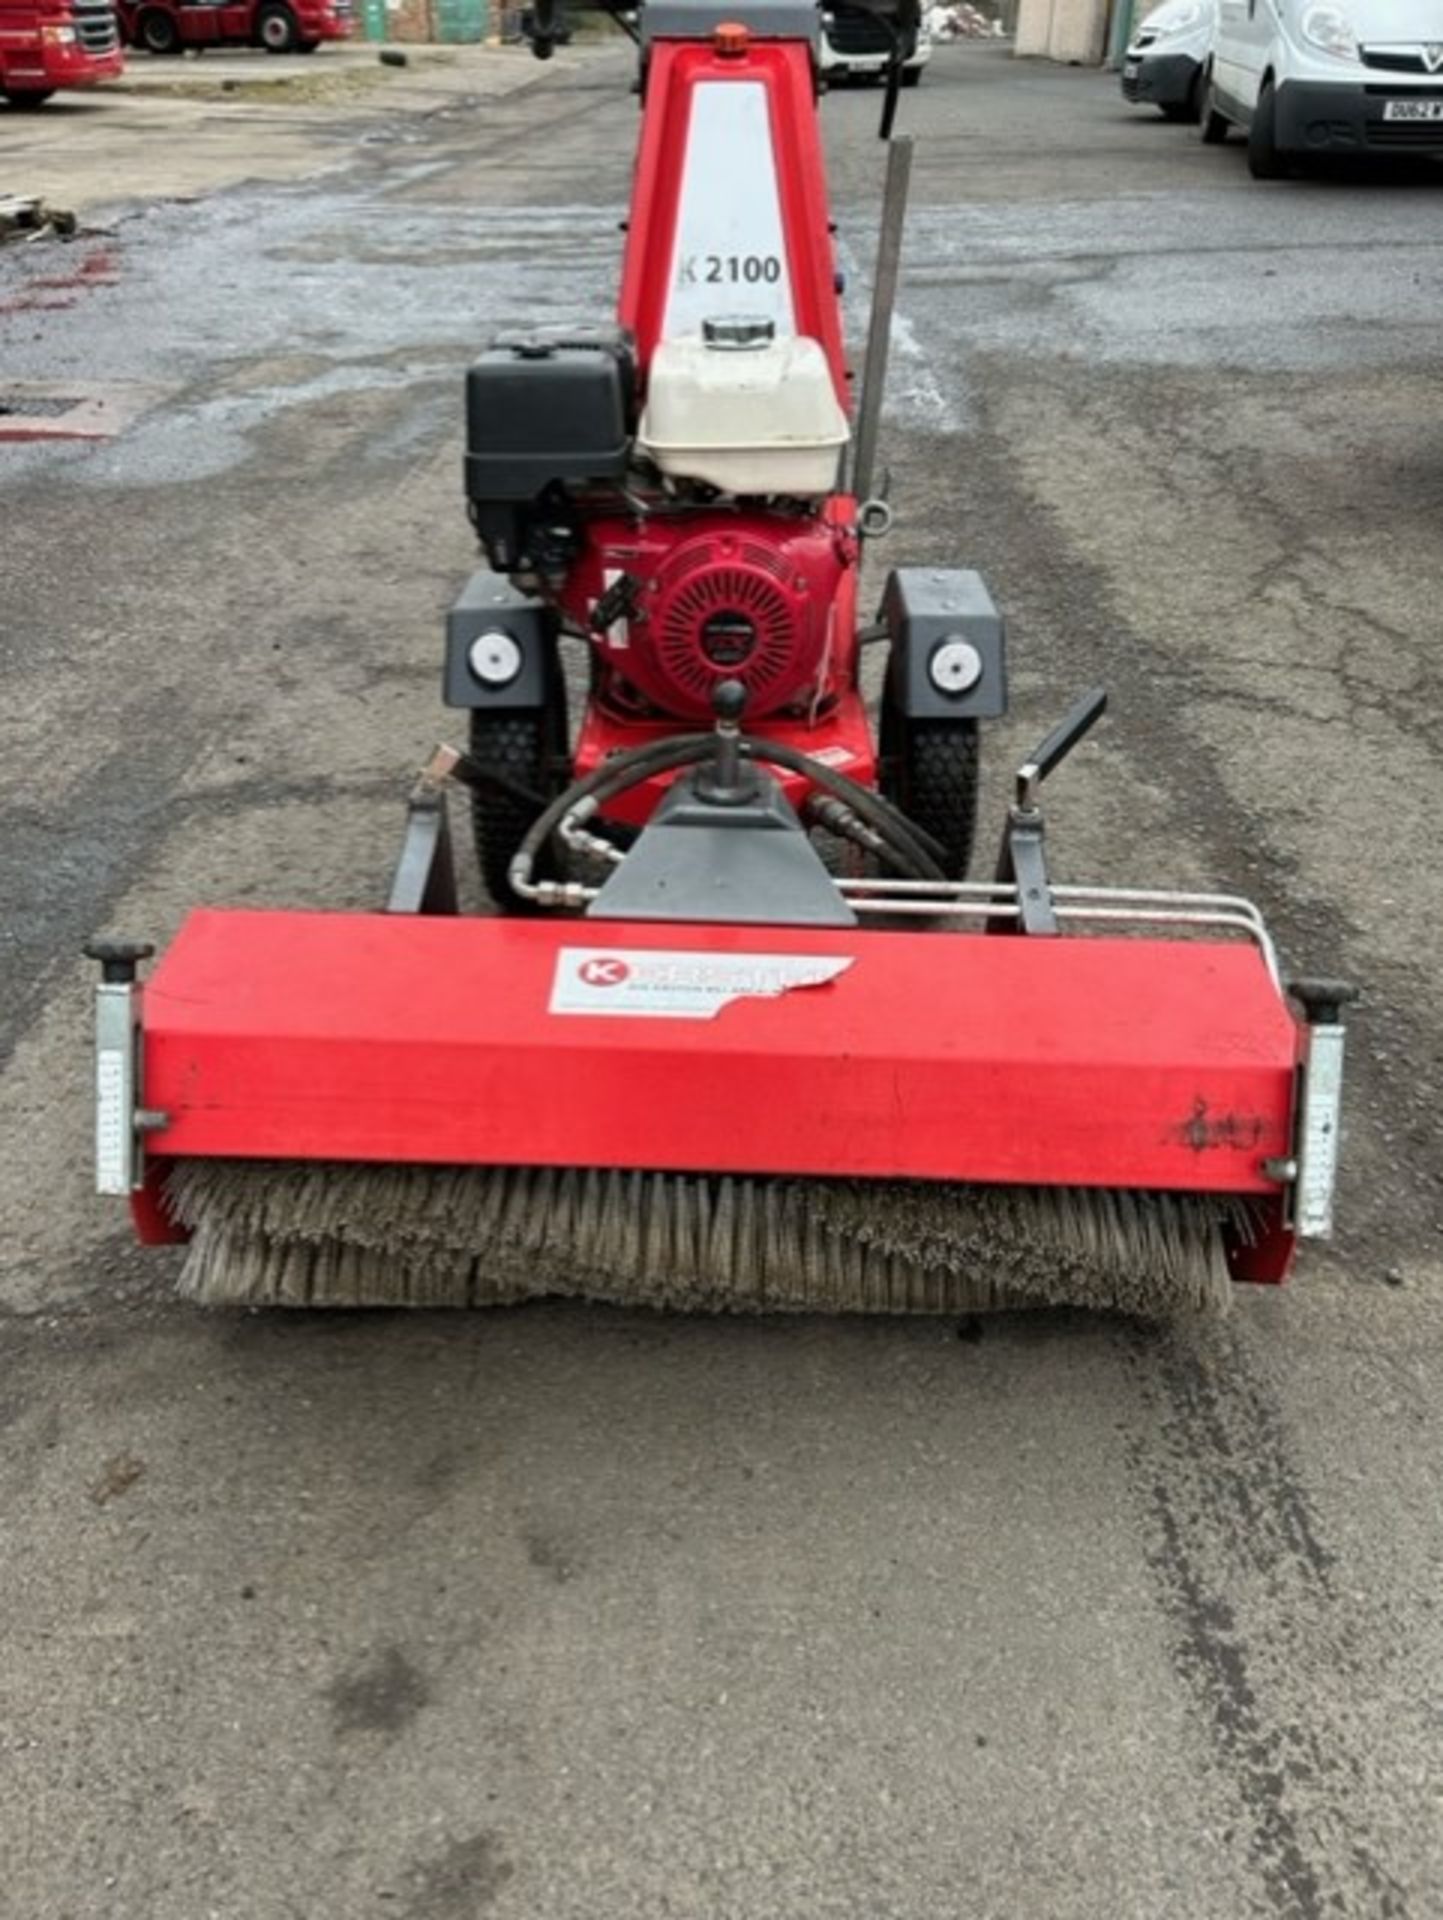 2019 Kersten k2100 hydraulic 2 wheeled tractor unit with sweeper attachment, kerb sweeper attachment - Image 4 of 8